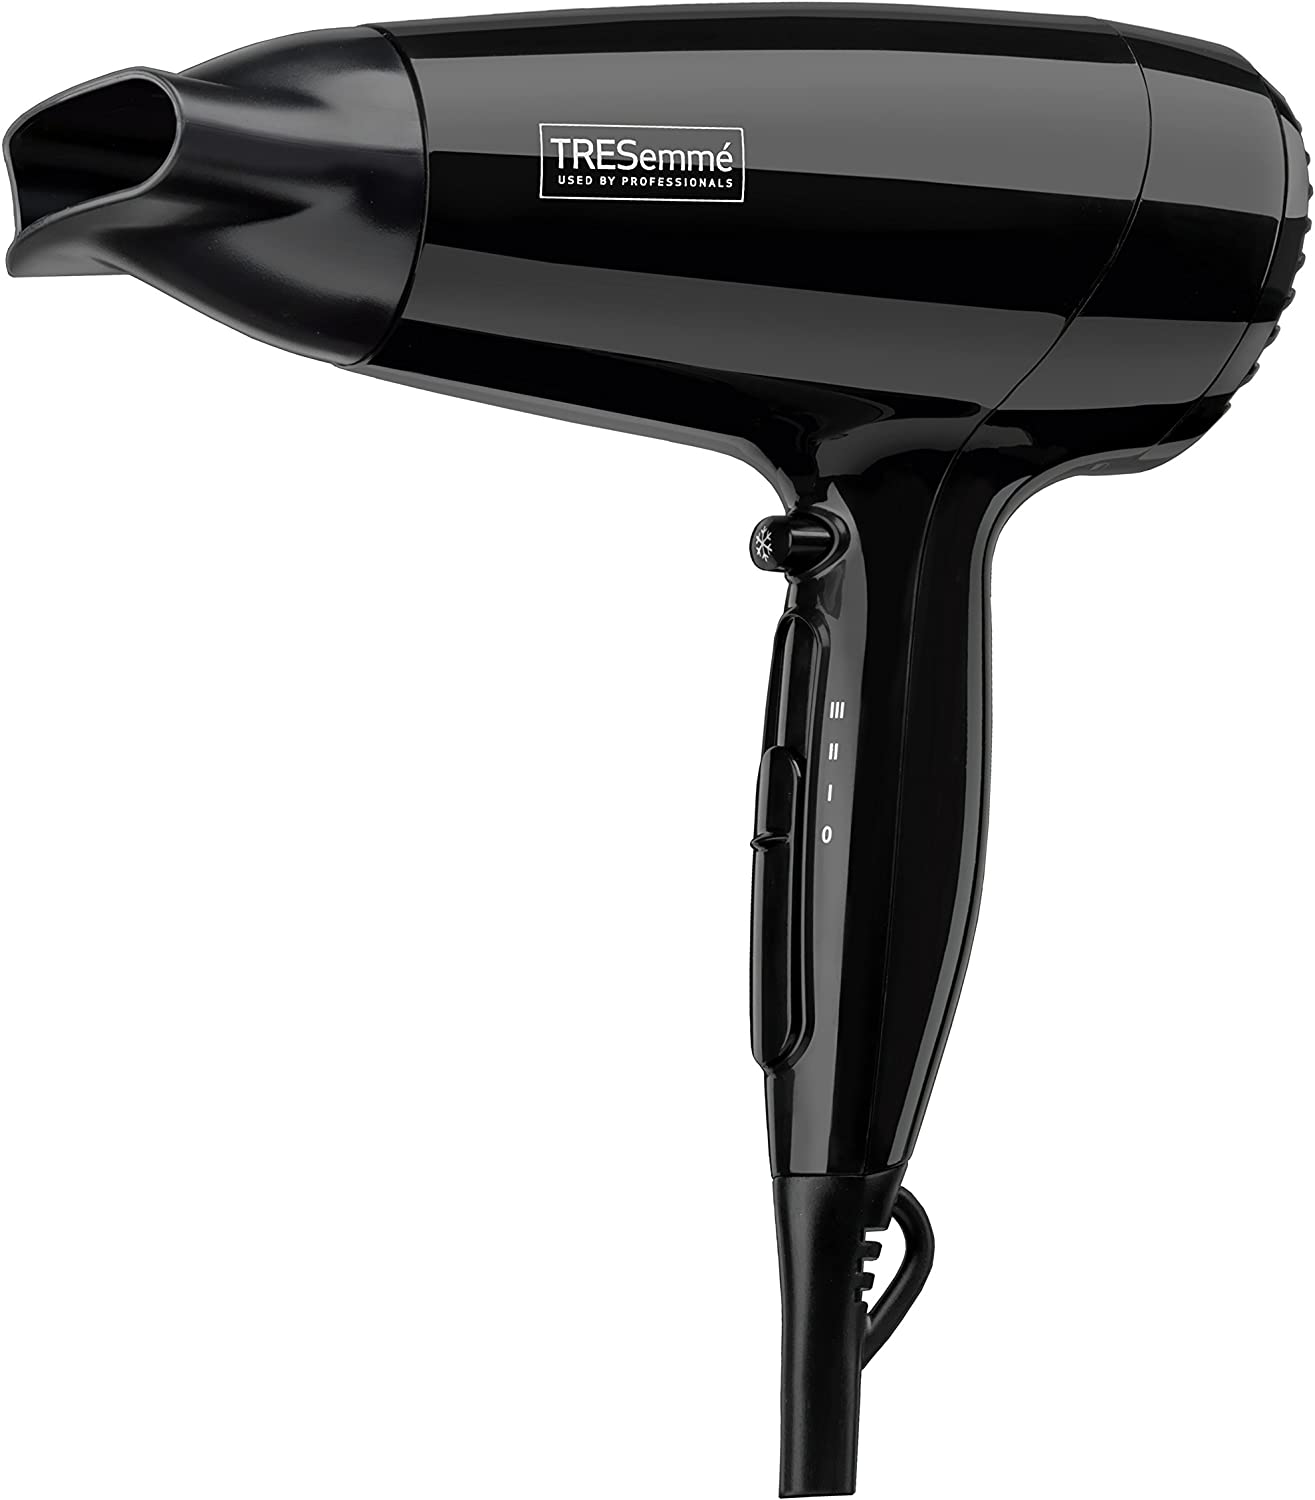 Tresemme Compact Hair Dryer